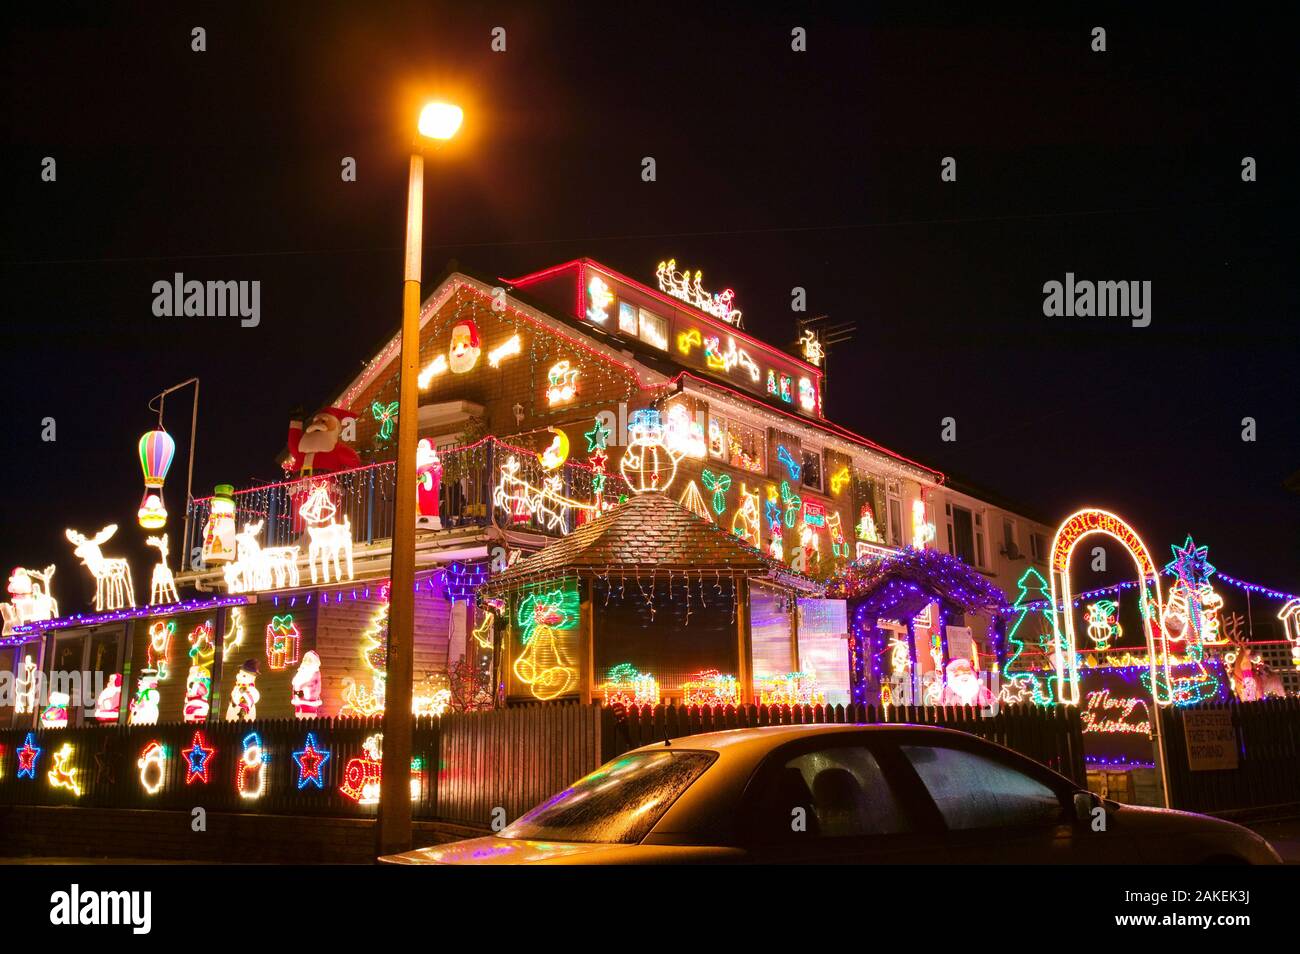 Christmas decorations on a house in Clitheroe, Lancashire, England, UK, December 2005. Stock Photo